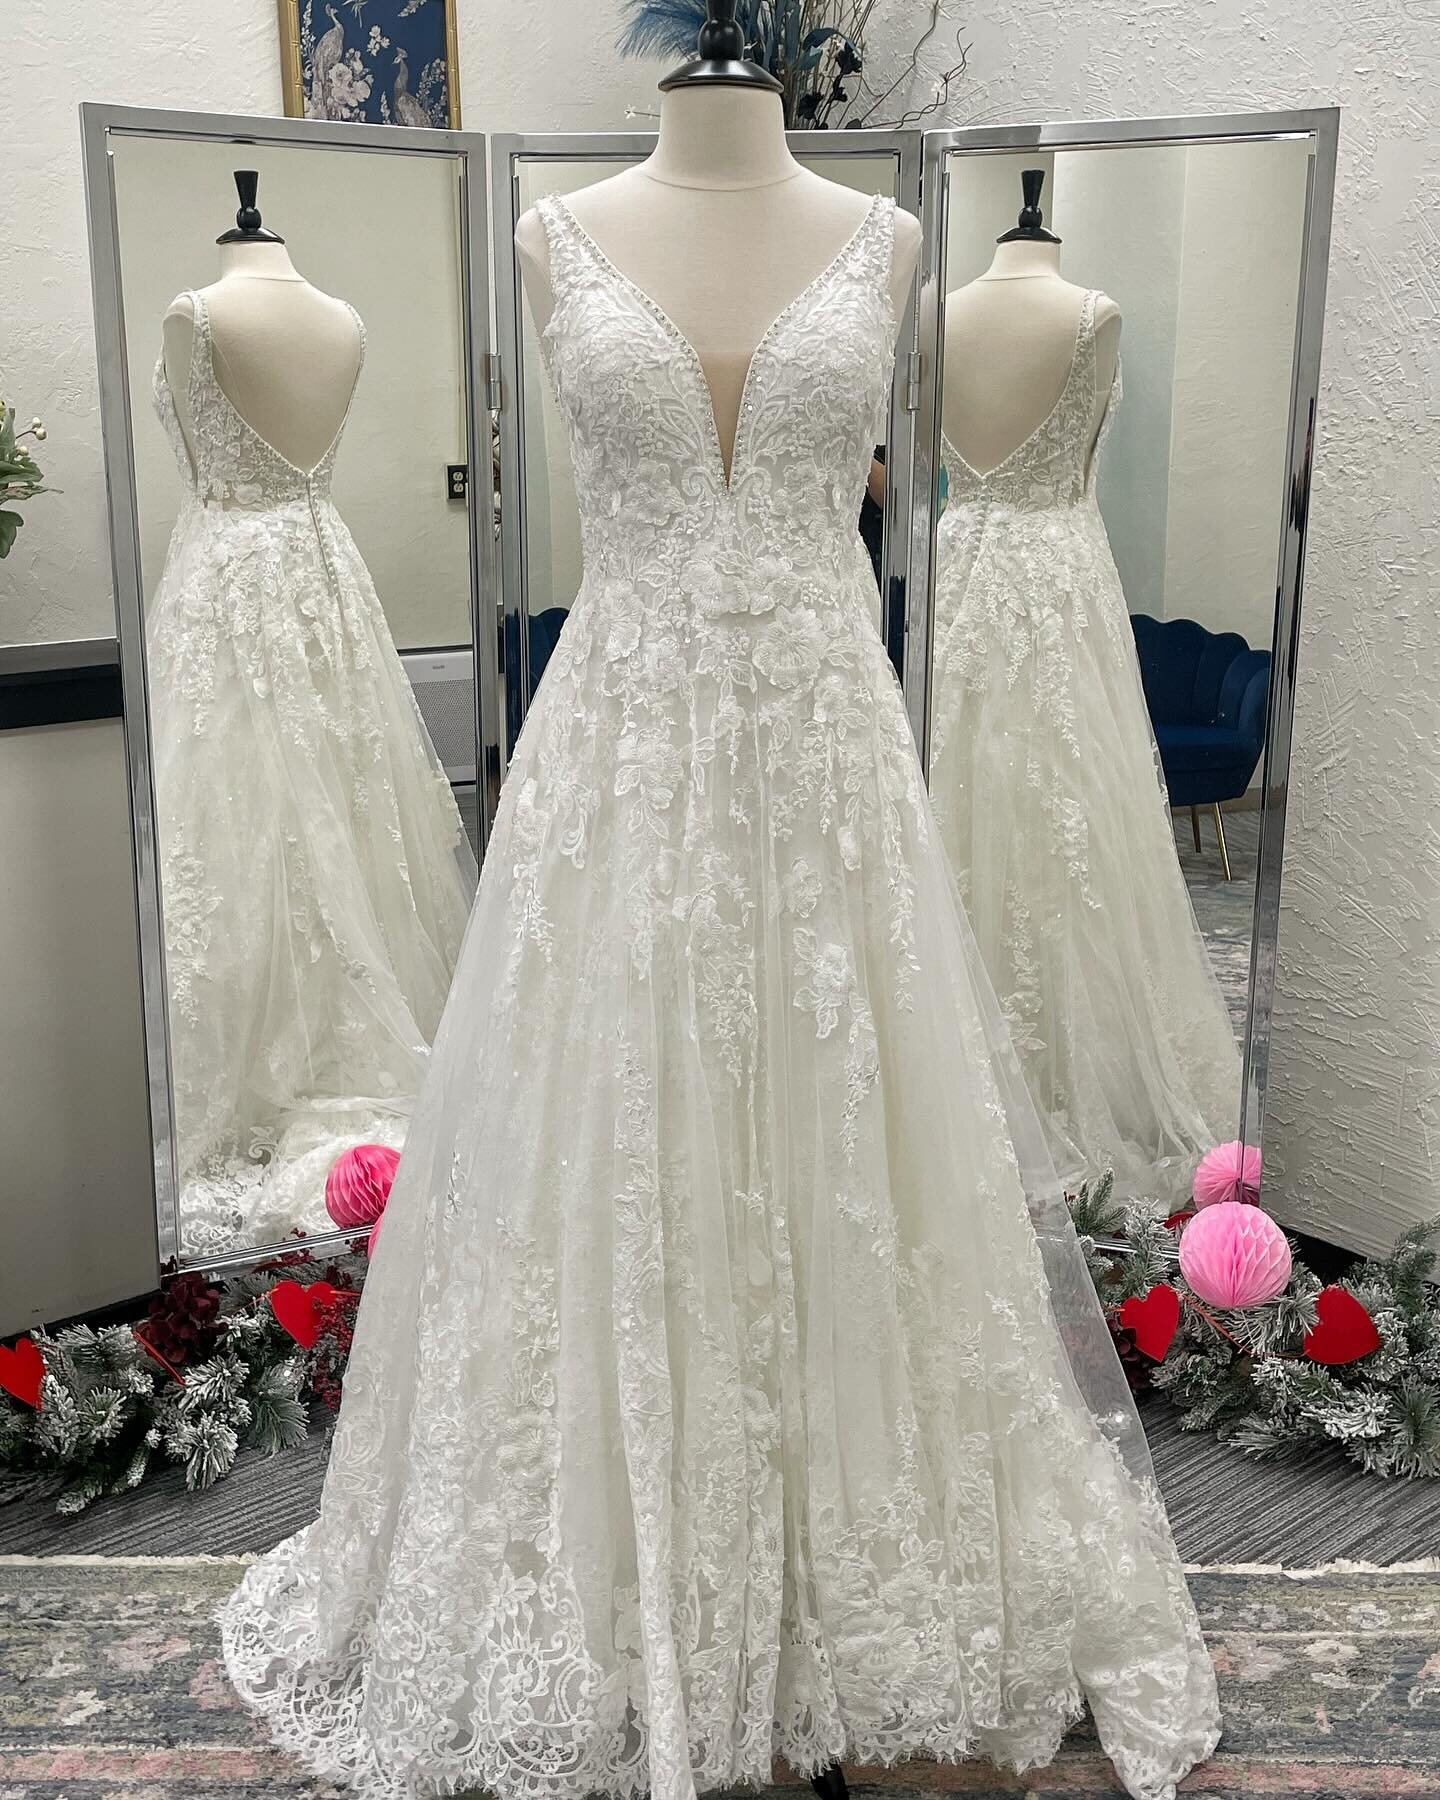 Why buy vintage and resale wedding dresses